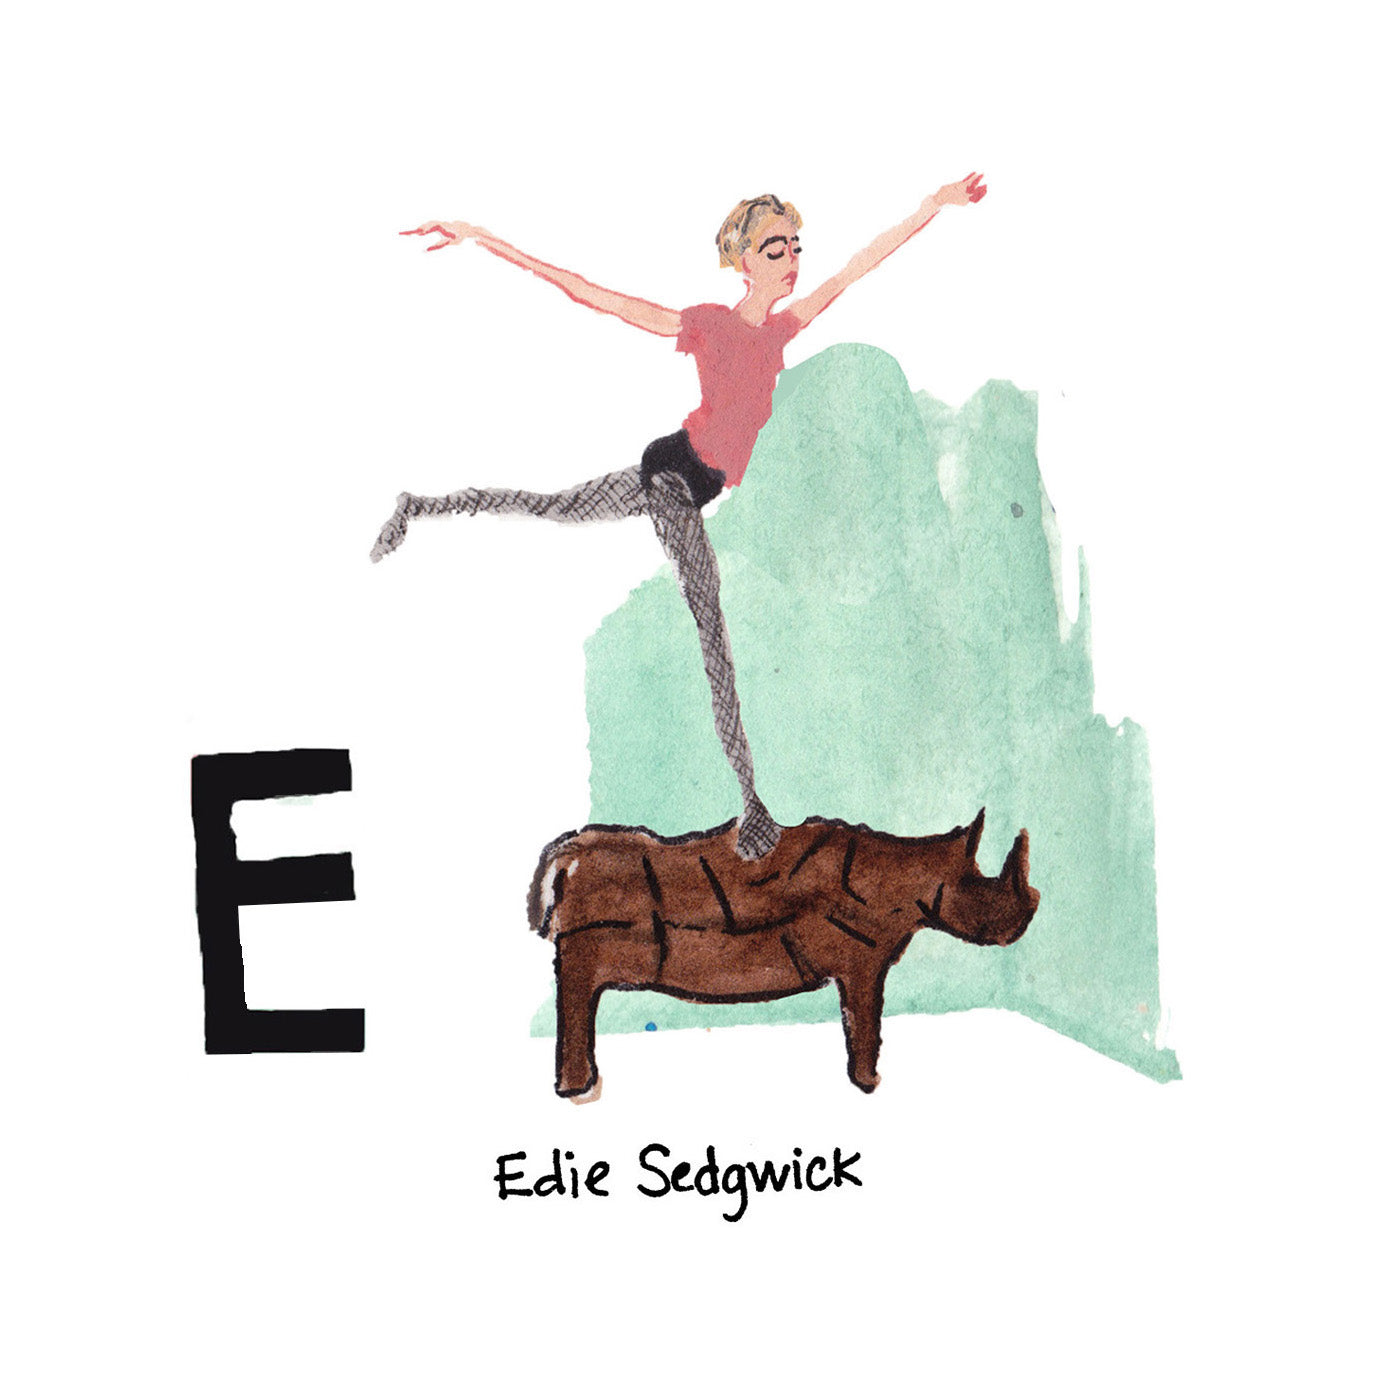 E is for Edie Sedgwick. Edie Sedgwick was a 1960s actress, ‘it girl’ and model from California. She was famously known as one of Andy Warhol’s muses from The Factory, starring in many of his short films.